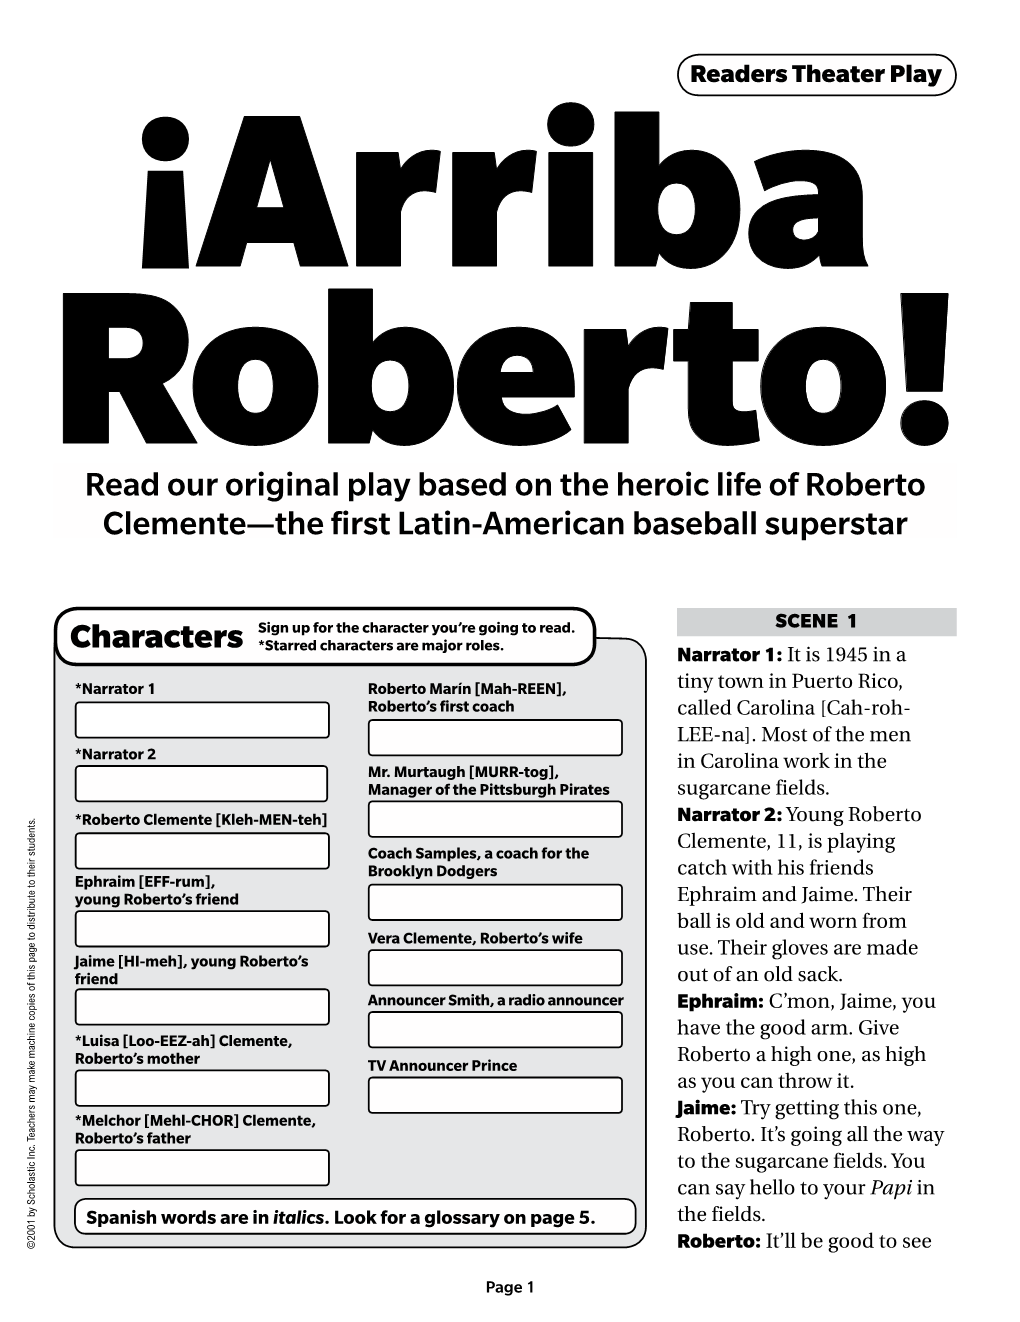 Read Our Original Play Based on the Heroic Life of Roberto Clemente—The First Latin-American Baseball Superstar